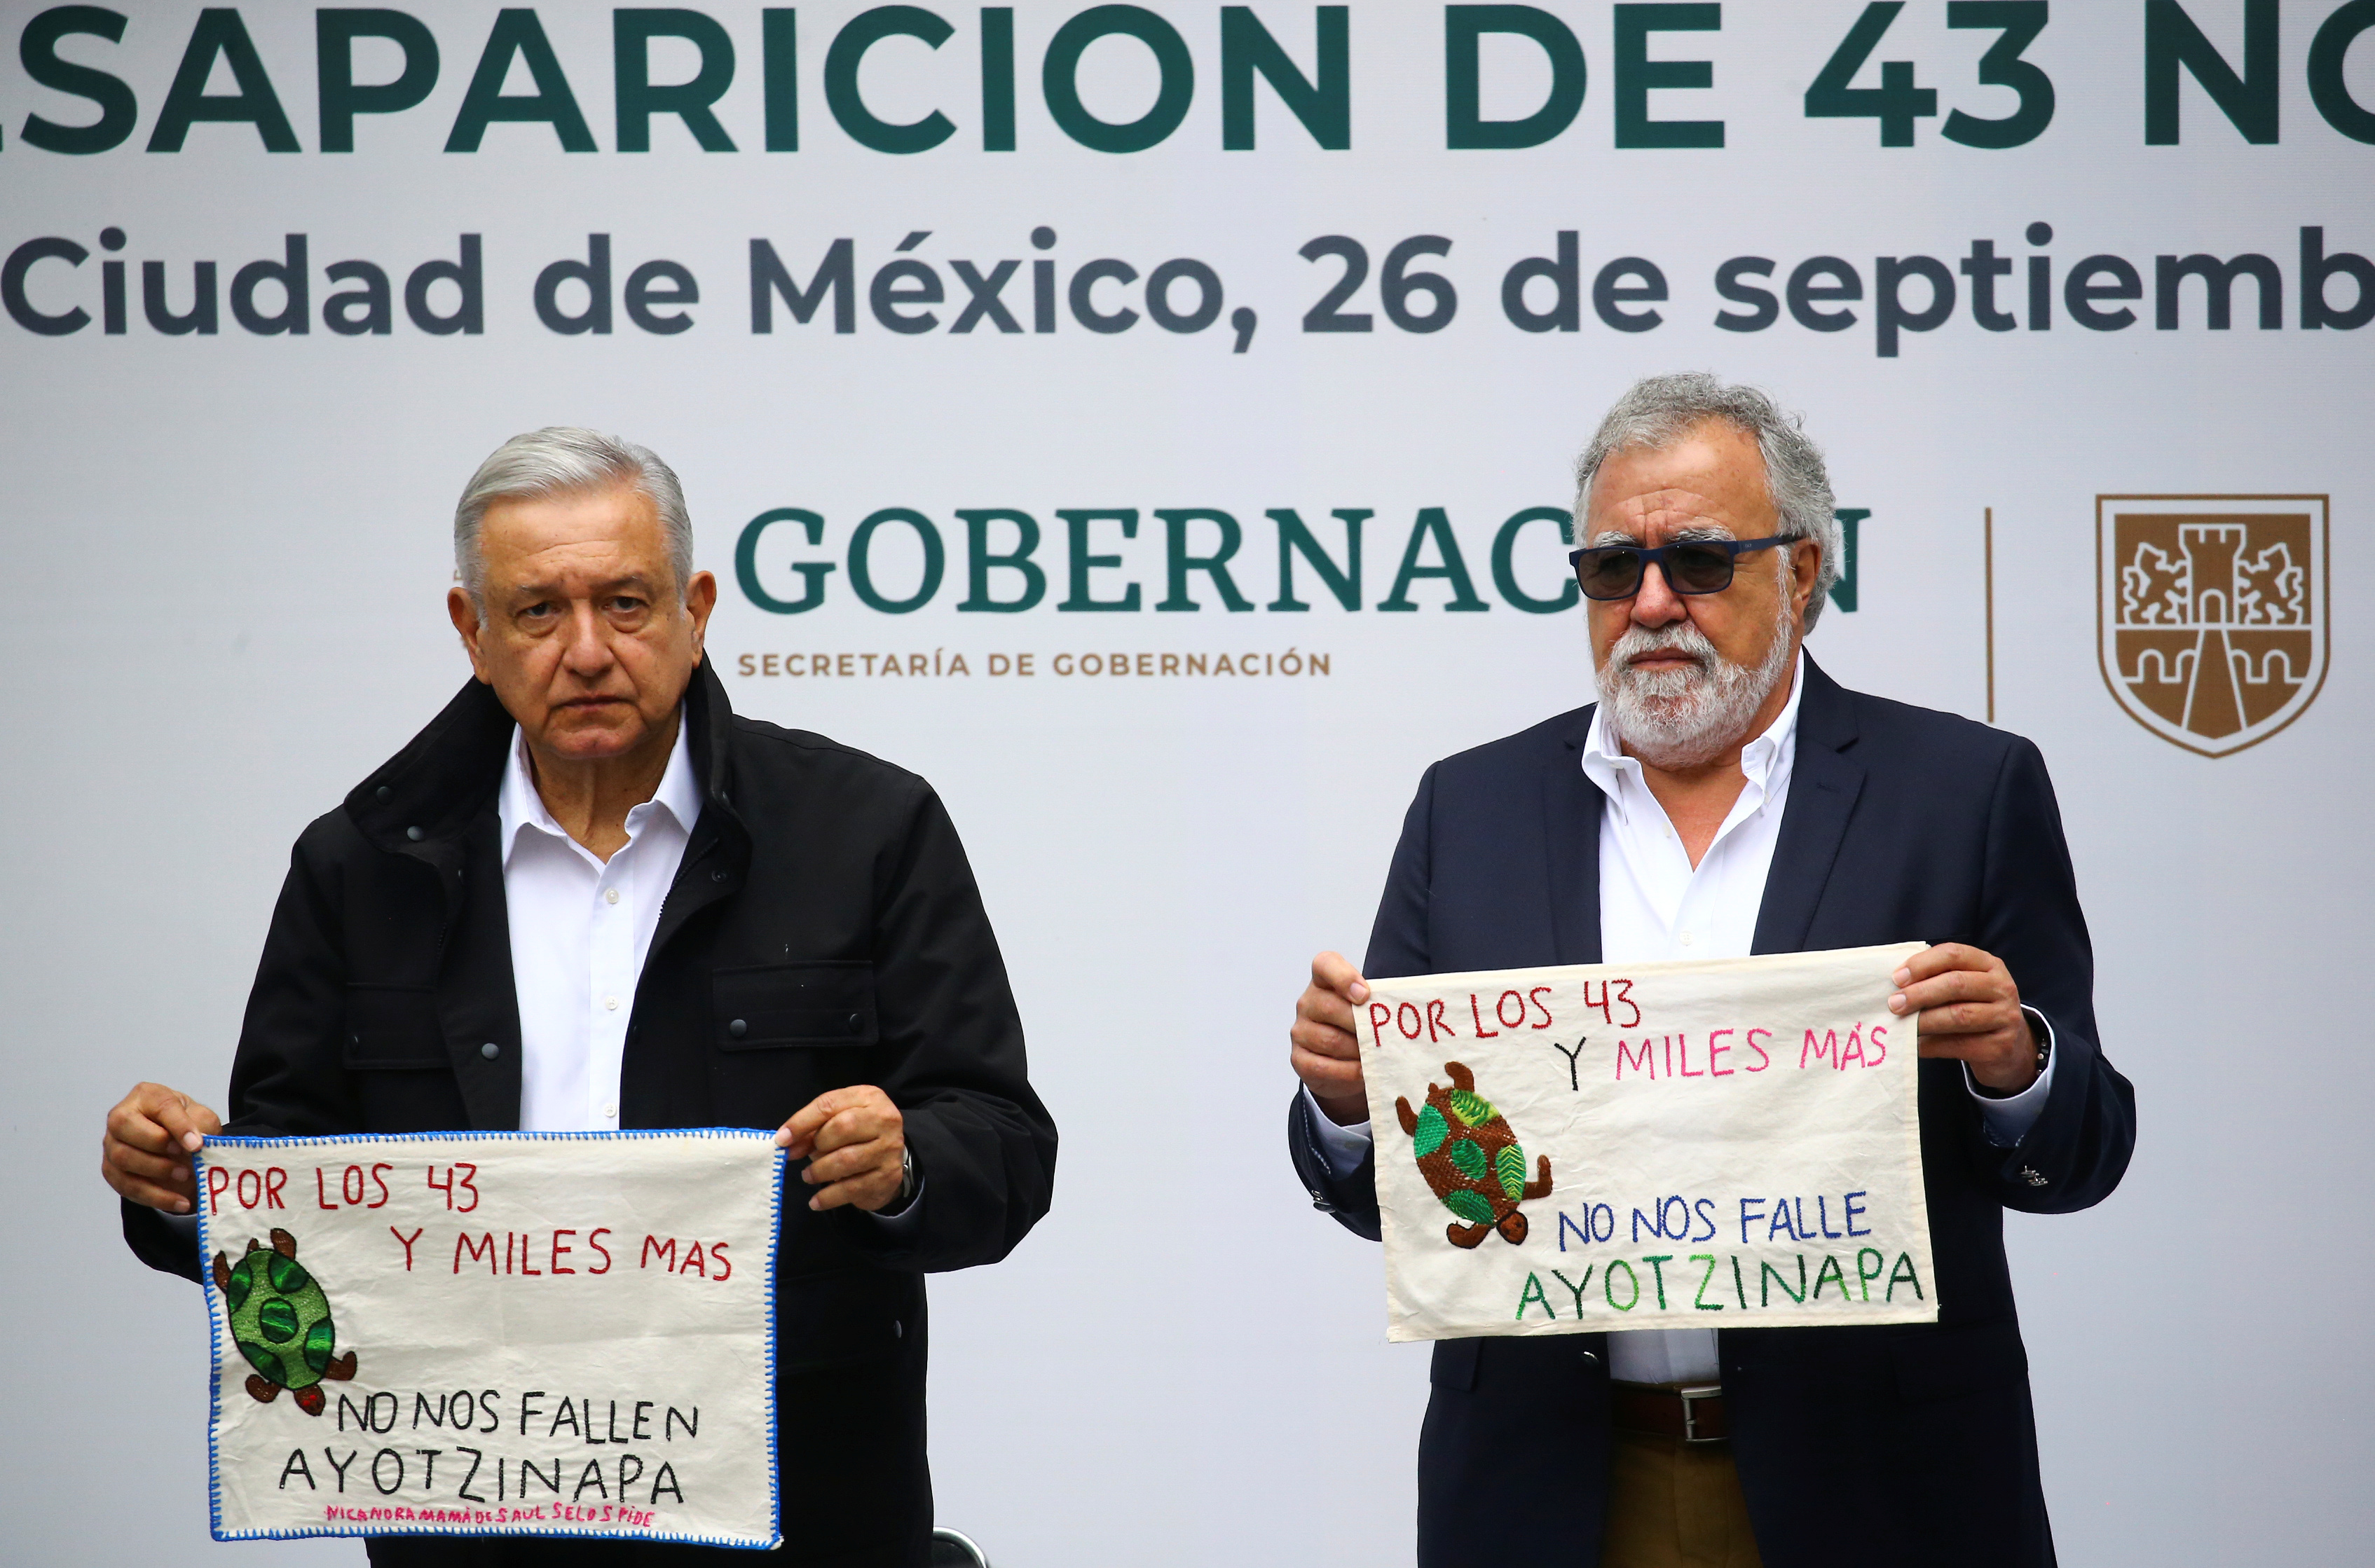 Mexico's President Andres Manuel Lopez Obrador and Mexico's Undersecretary of Human Rights Alejandro Encinas hold pieces of fabric embroidered by relatives of the 43 missing students of the Ayotzinapa Teacher Training College, as they attend the delivery of an investigation report with marking the 6th anniversary of their disappearance, at the National Palace in Mexico City, Mexico September 26, 2020. REUTERS/Edgard Garrido